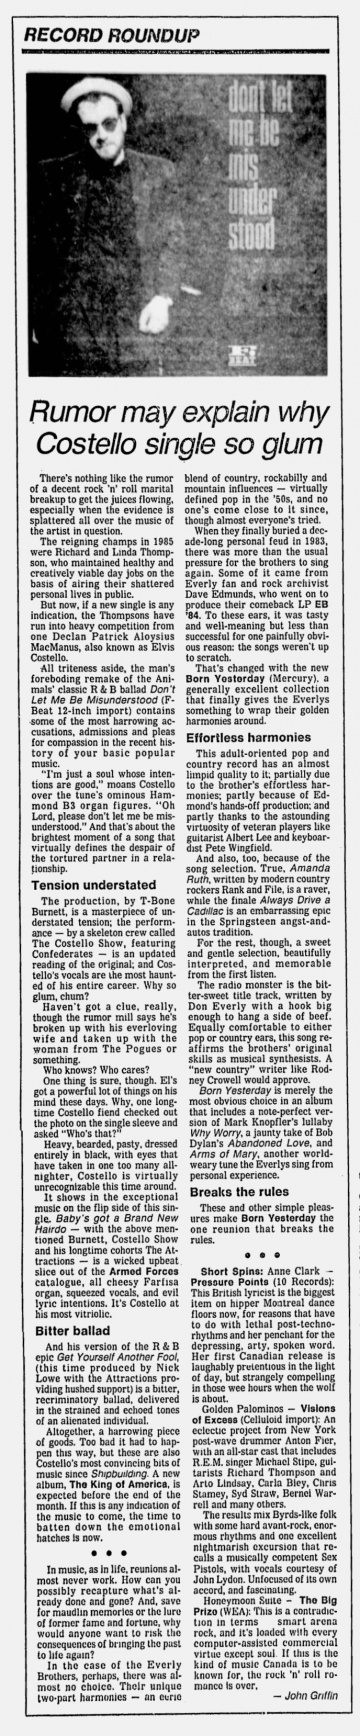 1986-02-13 Montreal Gazette page D13 clipping 01.jpg